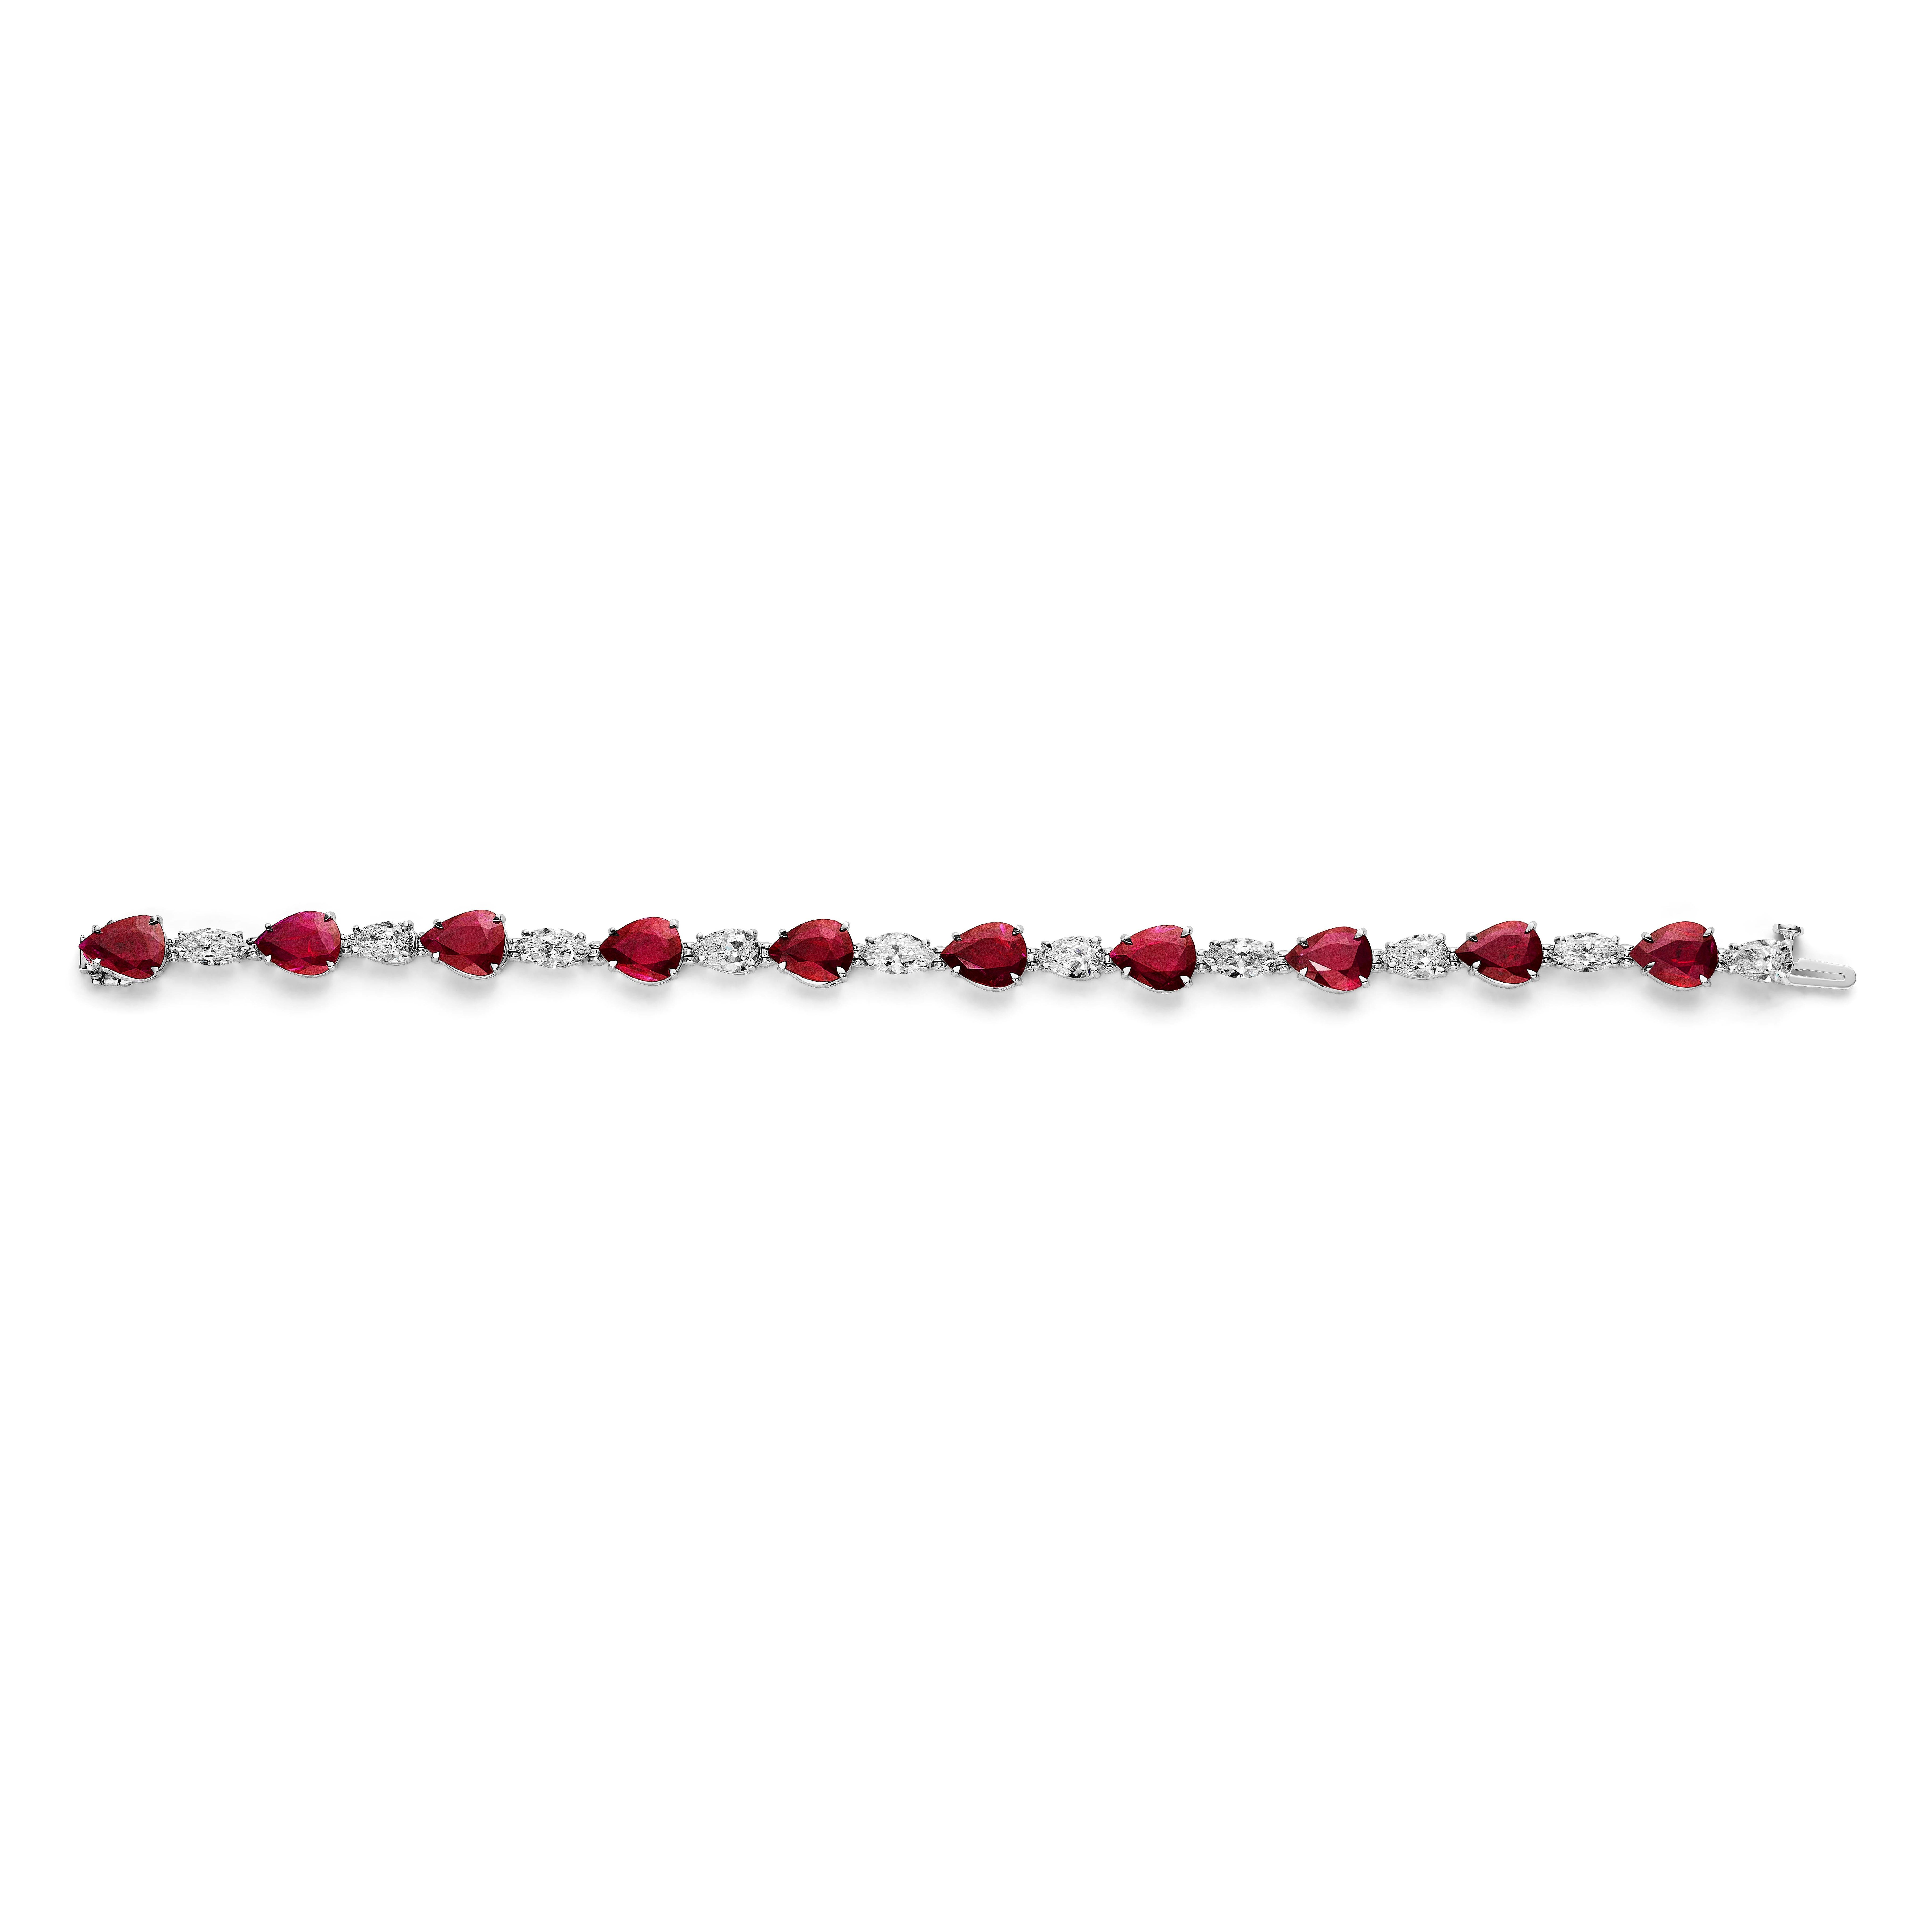 Magnificent Ruby and Diamond Bracelet

10 Pear shaped Rubies weighing approximately 12.92 Carats, alternating with 10 Marquise and Pear shaped Diamonds weighing approximately 5.09 Carats.
Each Diamond is individually certified by GIA as DEF color